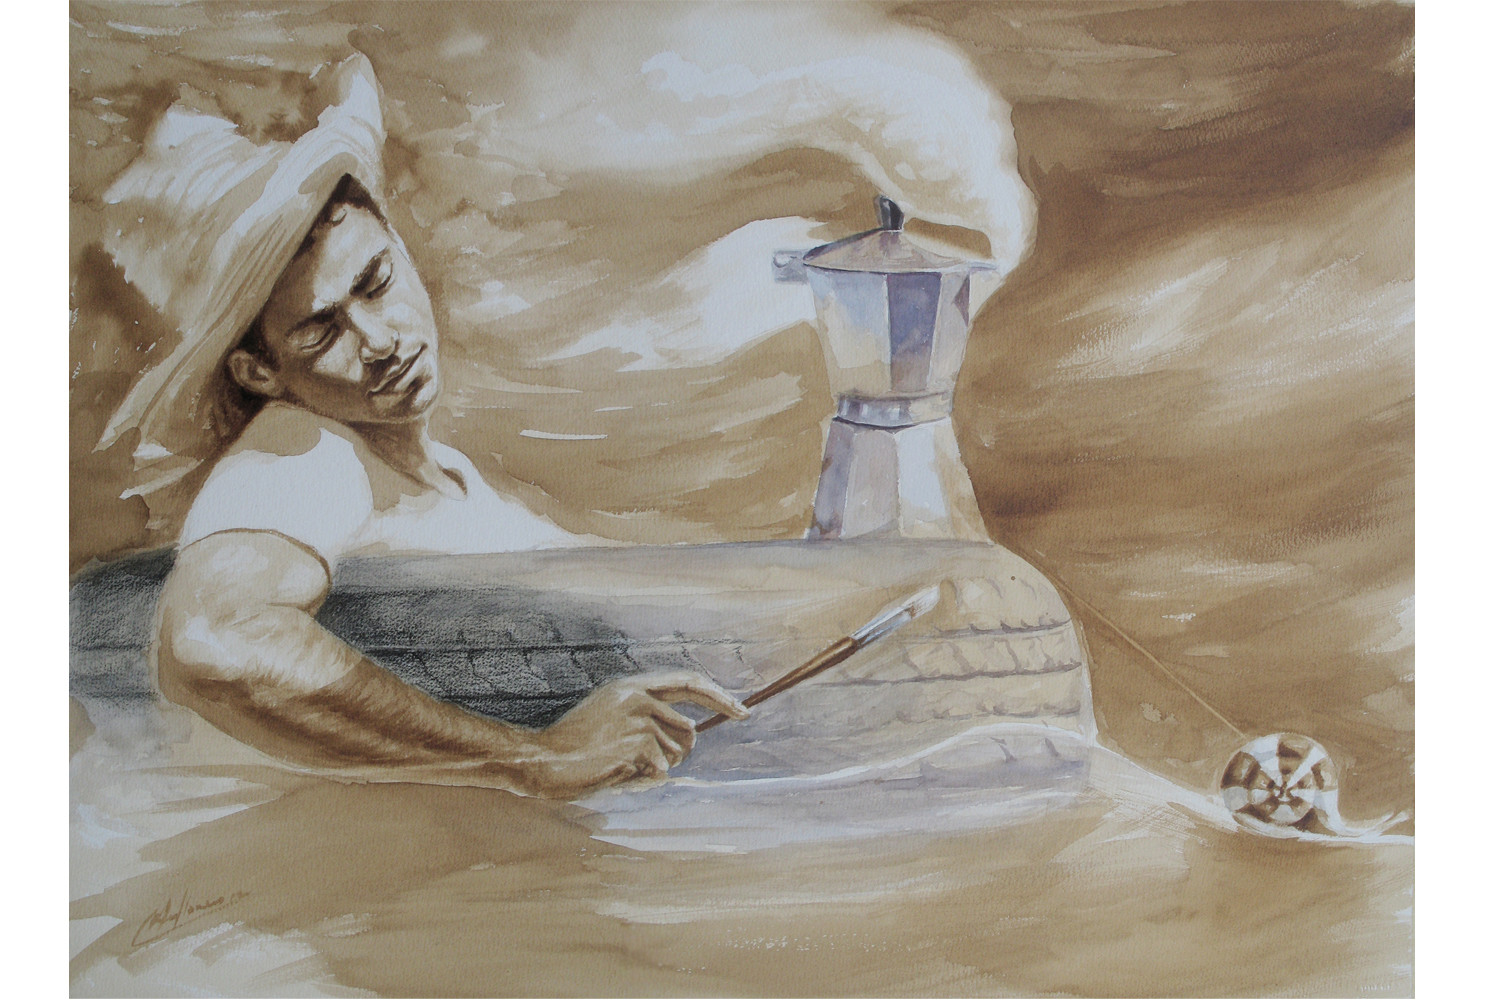 SOS for a Shipwreck at Sea, 2012 
By Reynier Llanes (Cuban-American, b. 1985). Coffee and acrylic on paper, 20 x 30 inches. Loan courtesy of Richard Weedman and Jonathan Green Collection. Image ©Reynier Llanes.
